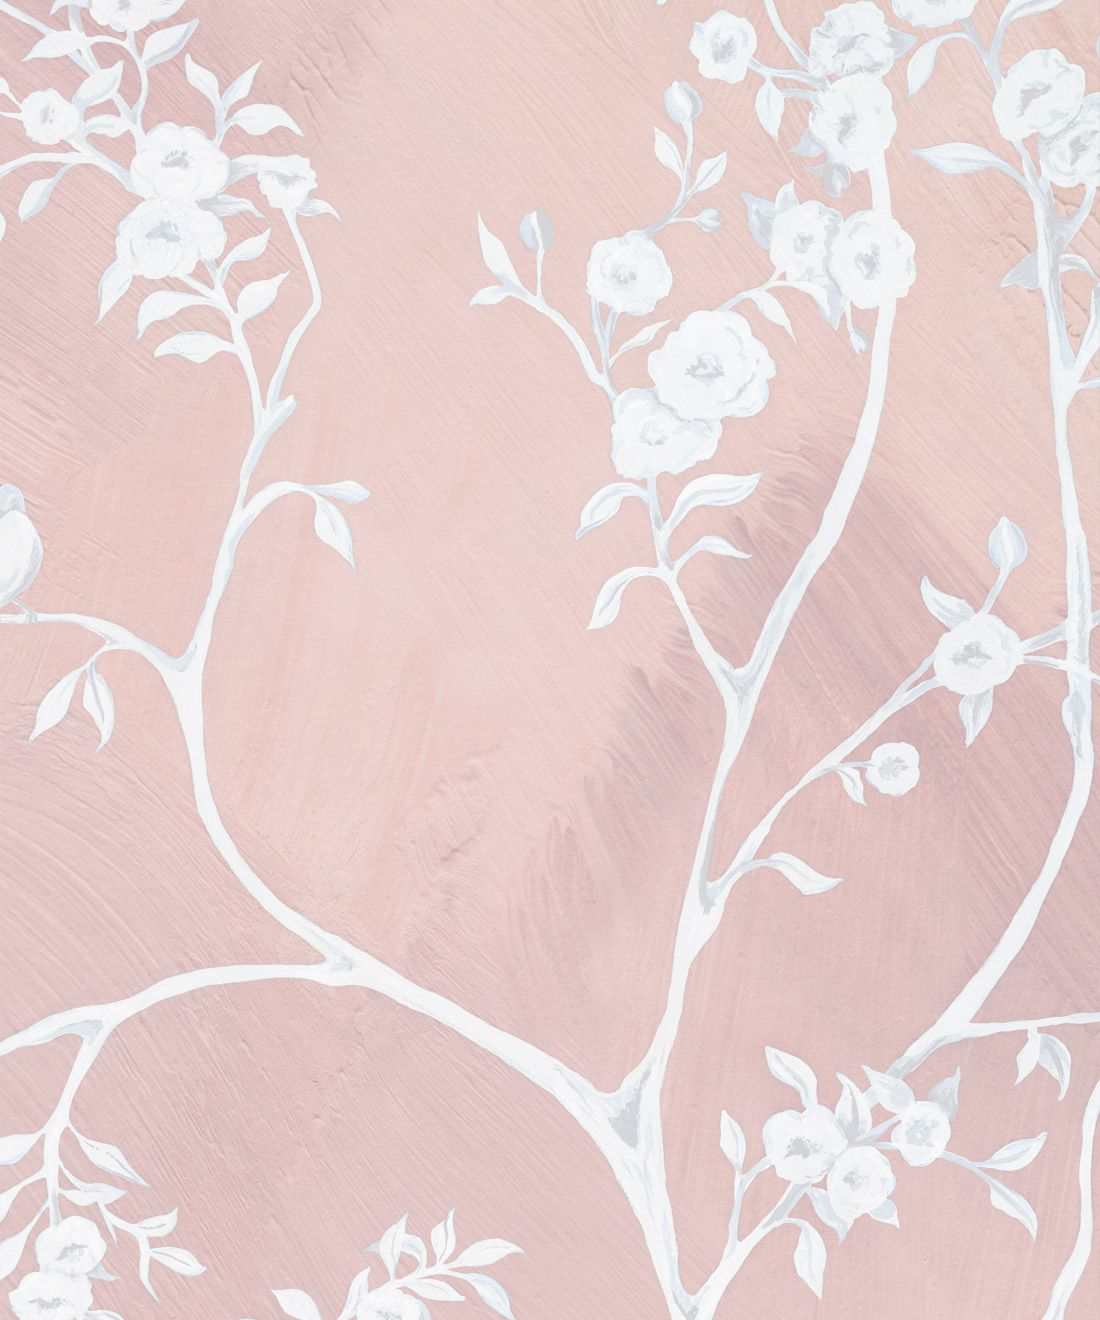 Blooming Joy • Chinoiserie Wallpaper by Danica Andler • Pink Blush Swatch